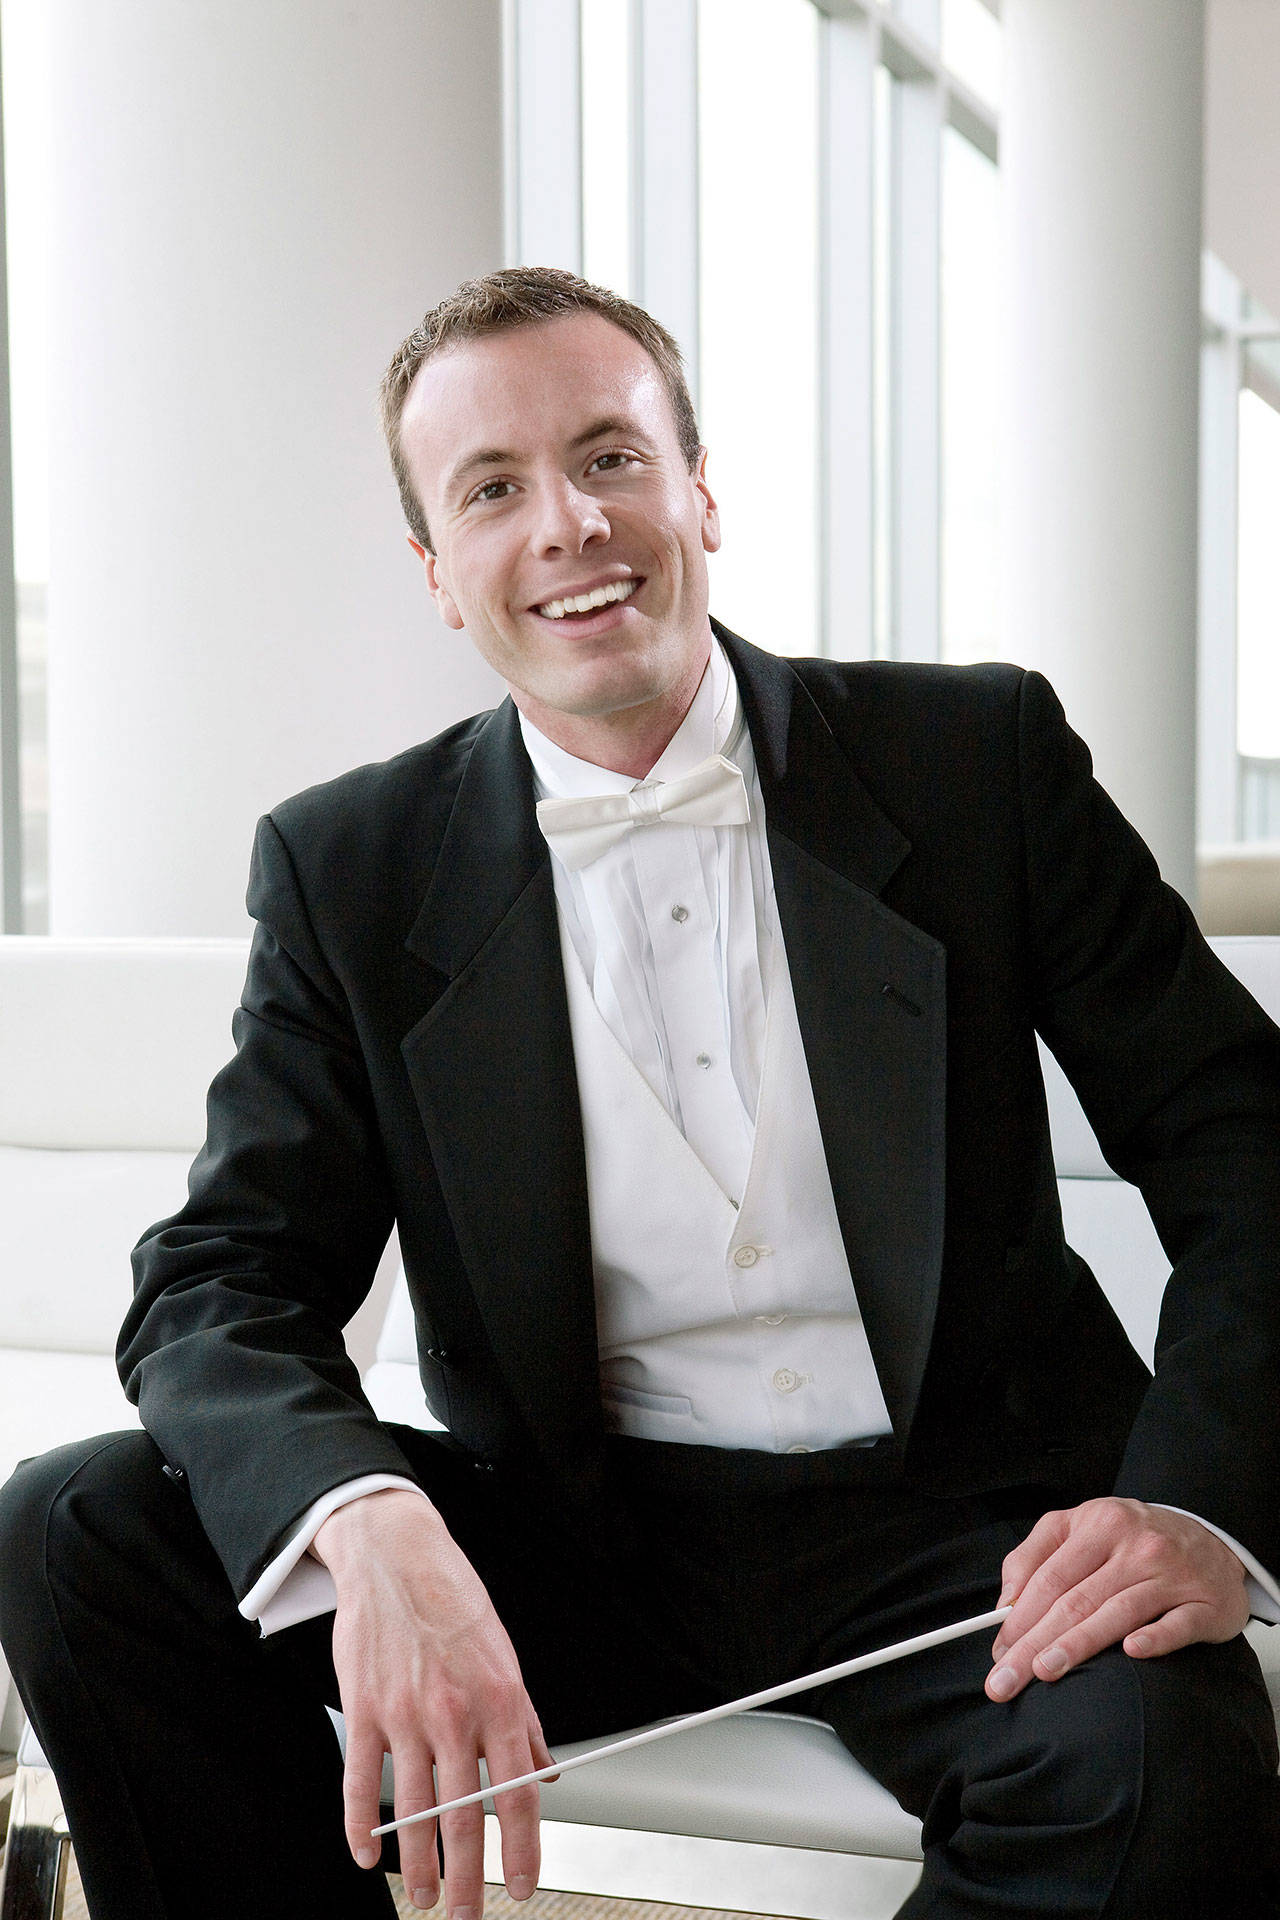 Wesley Schulz brings extensive national and international experience to his new role, conductor of the Auburn Symphony Orchestra. He debuts with the orchestra on Oct. 14. COURTESY PHOTO